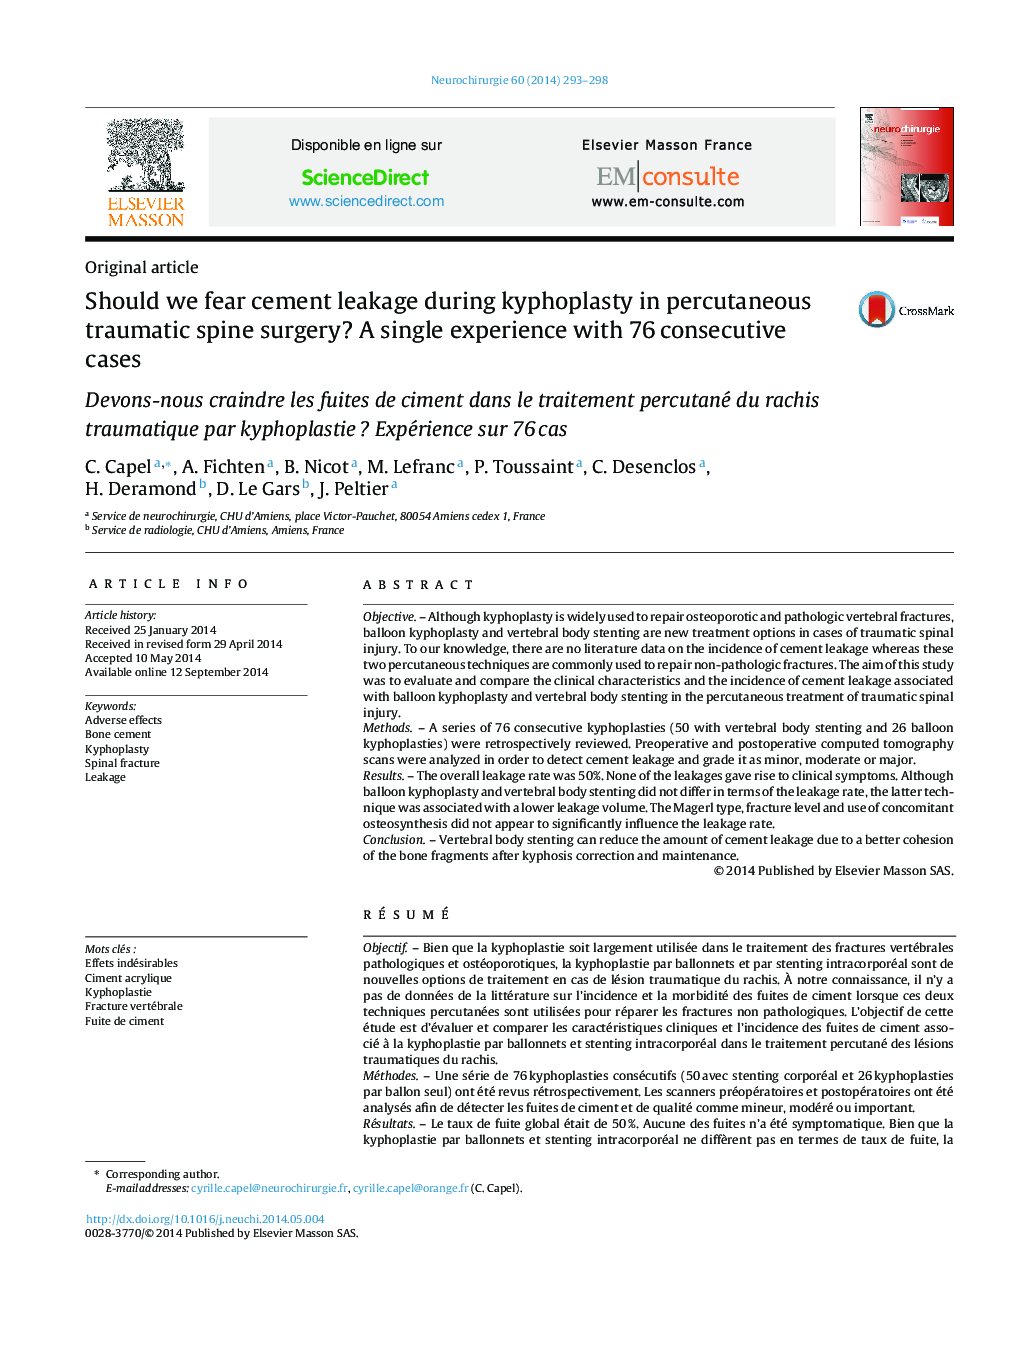 Should we fear cement leakage during kyphoplasty in percutaneous traumatic spine surgery? A single experience with 76Â consecutive cases